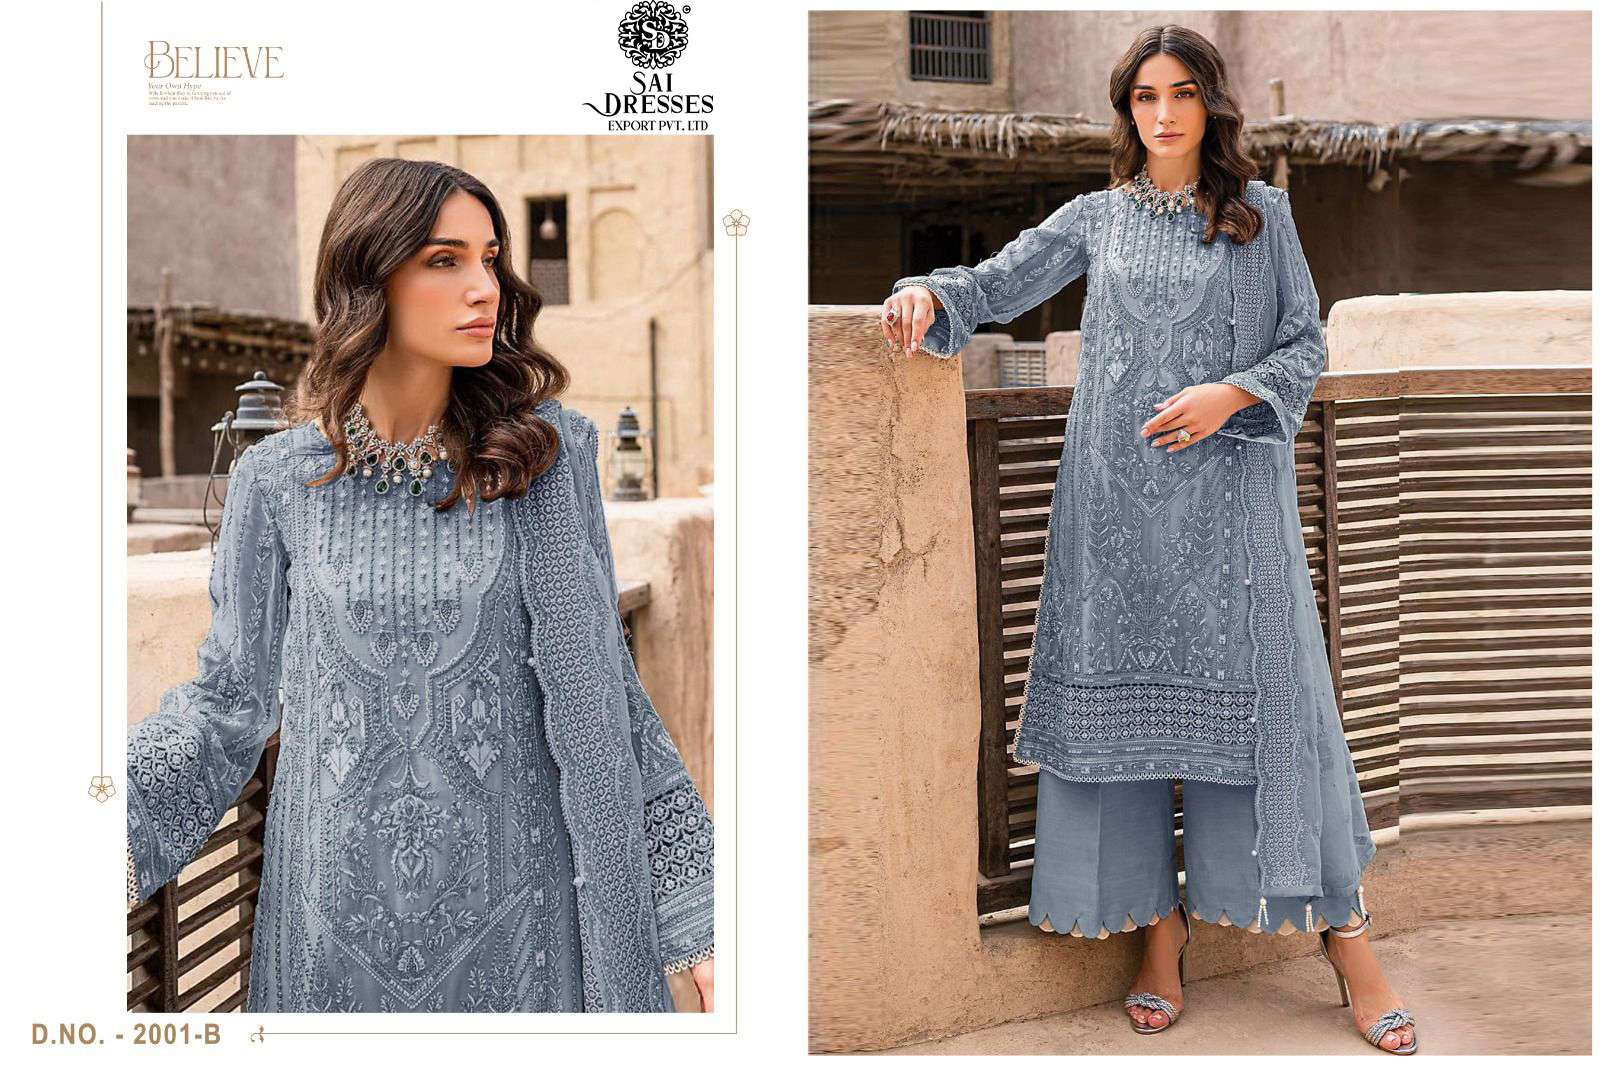 SAI DRESSES PRESENT EMAAN ADEEL PREMIUM COLLECTION VOL 2 SEMI STITCHED PARTY WEAR PAKISTANI DESIGNER SUITS IN WHOLESALE RATE IN SURAT